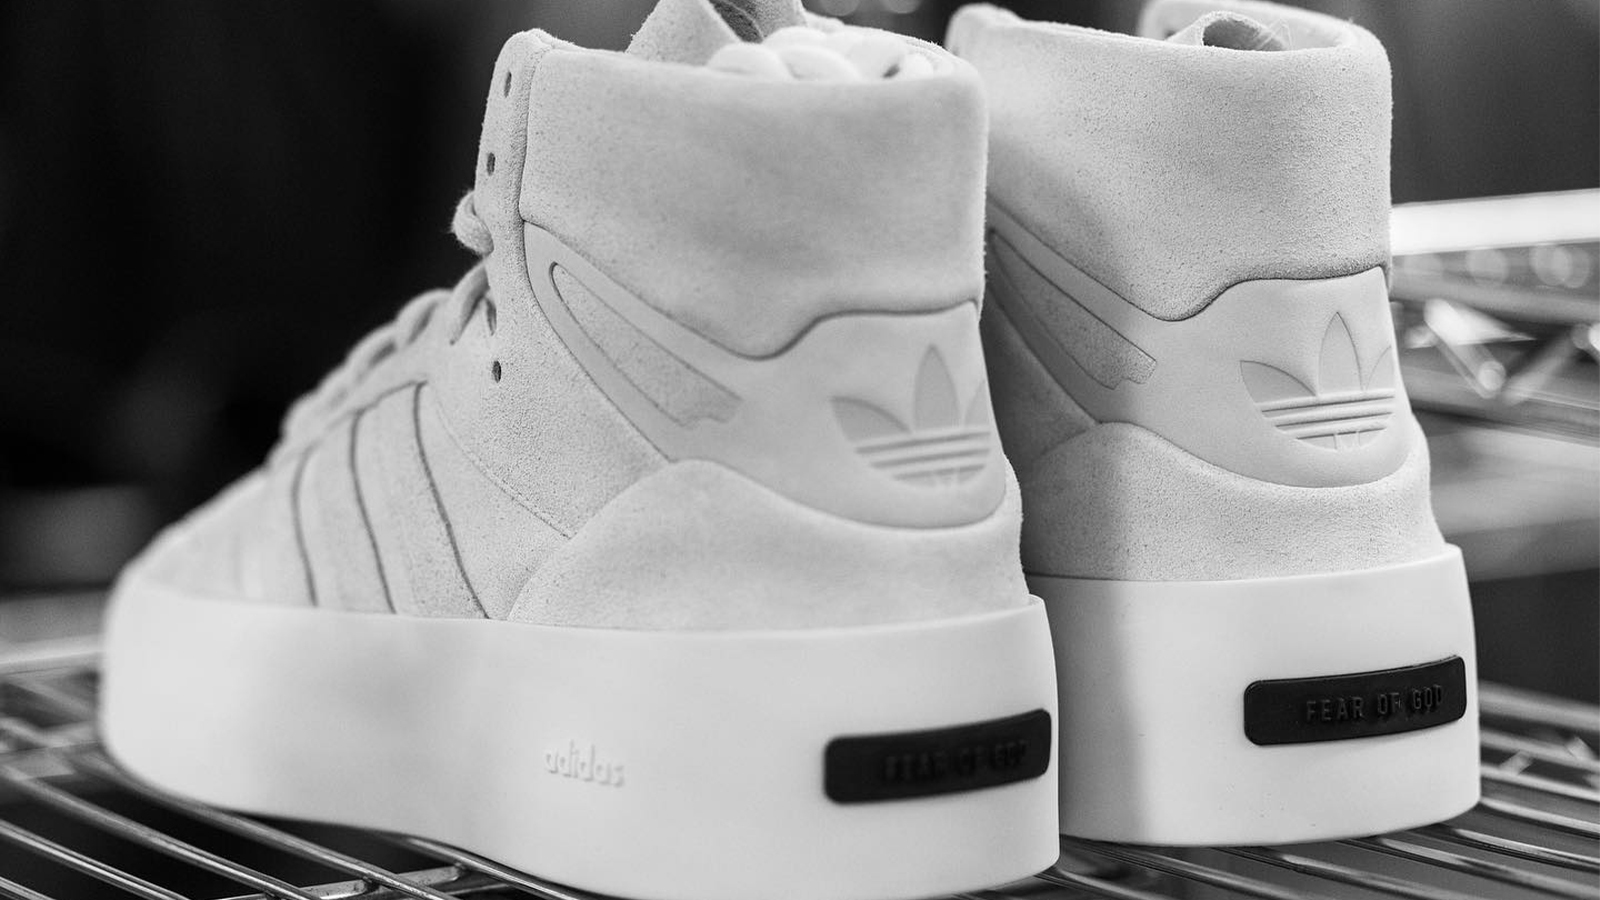 Is Fear Of God Athletics The New Yeezy? 